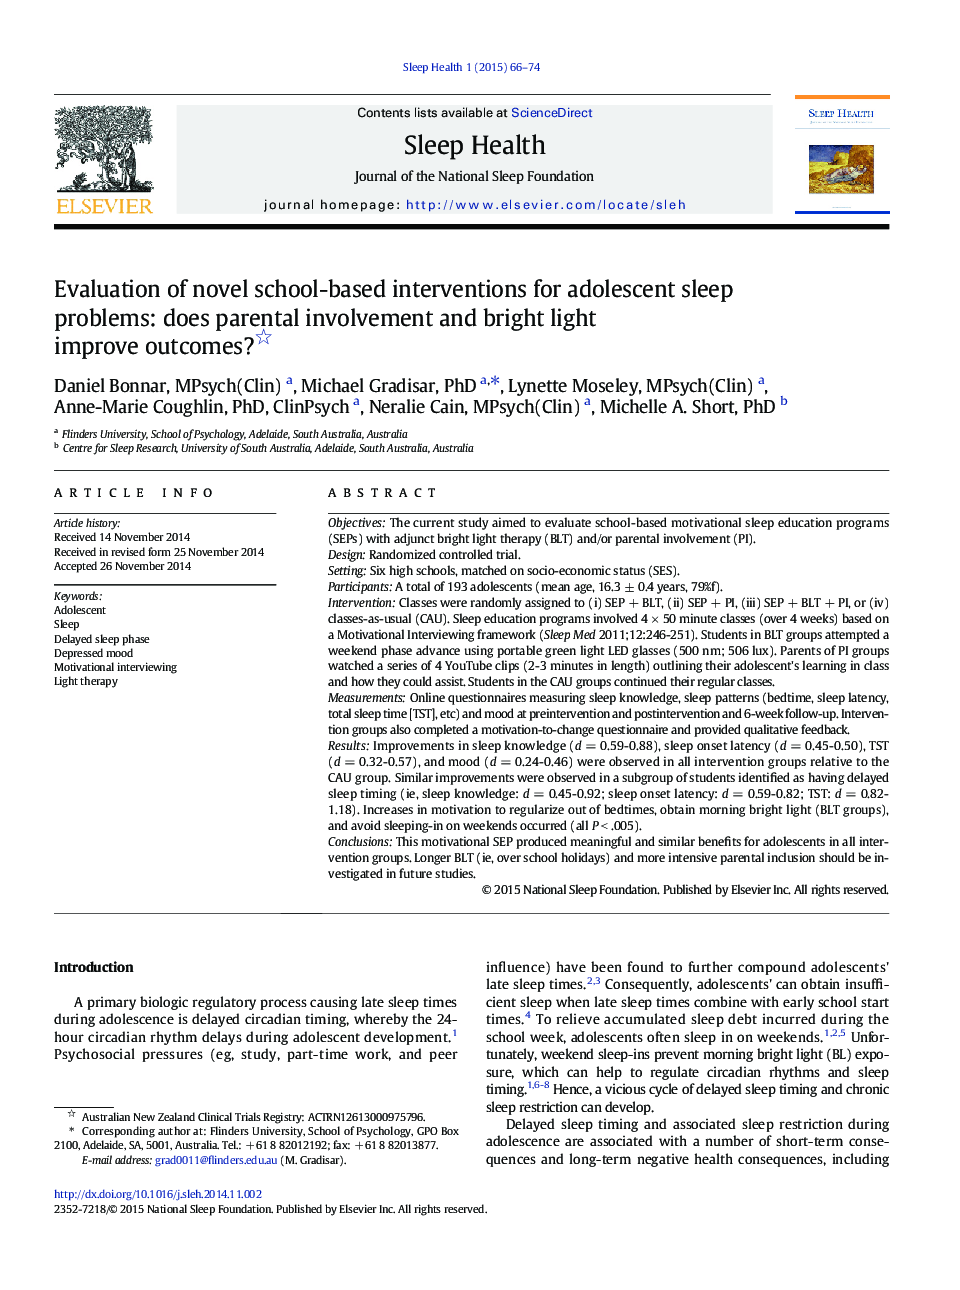 Evaluation of novel school-based interventions for adolescent sleep problems: does parental involvement and bright light improve outcomes? 